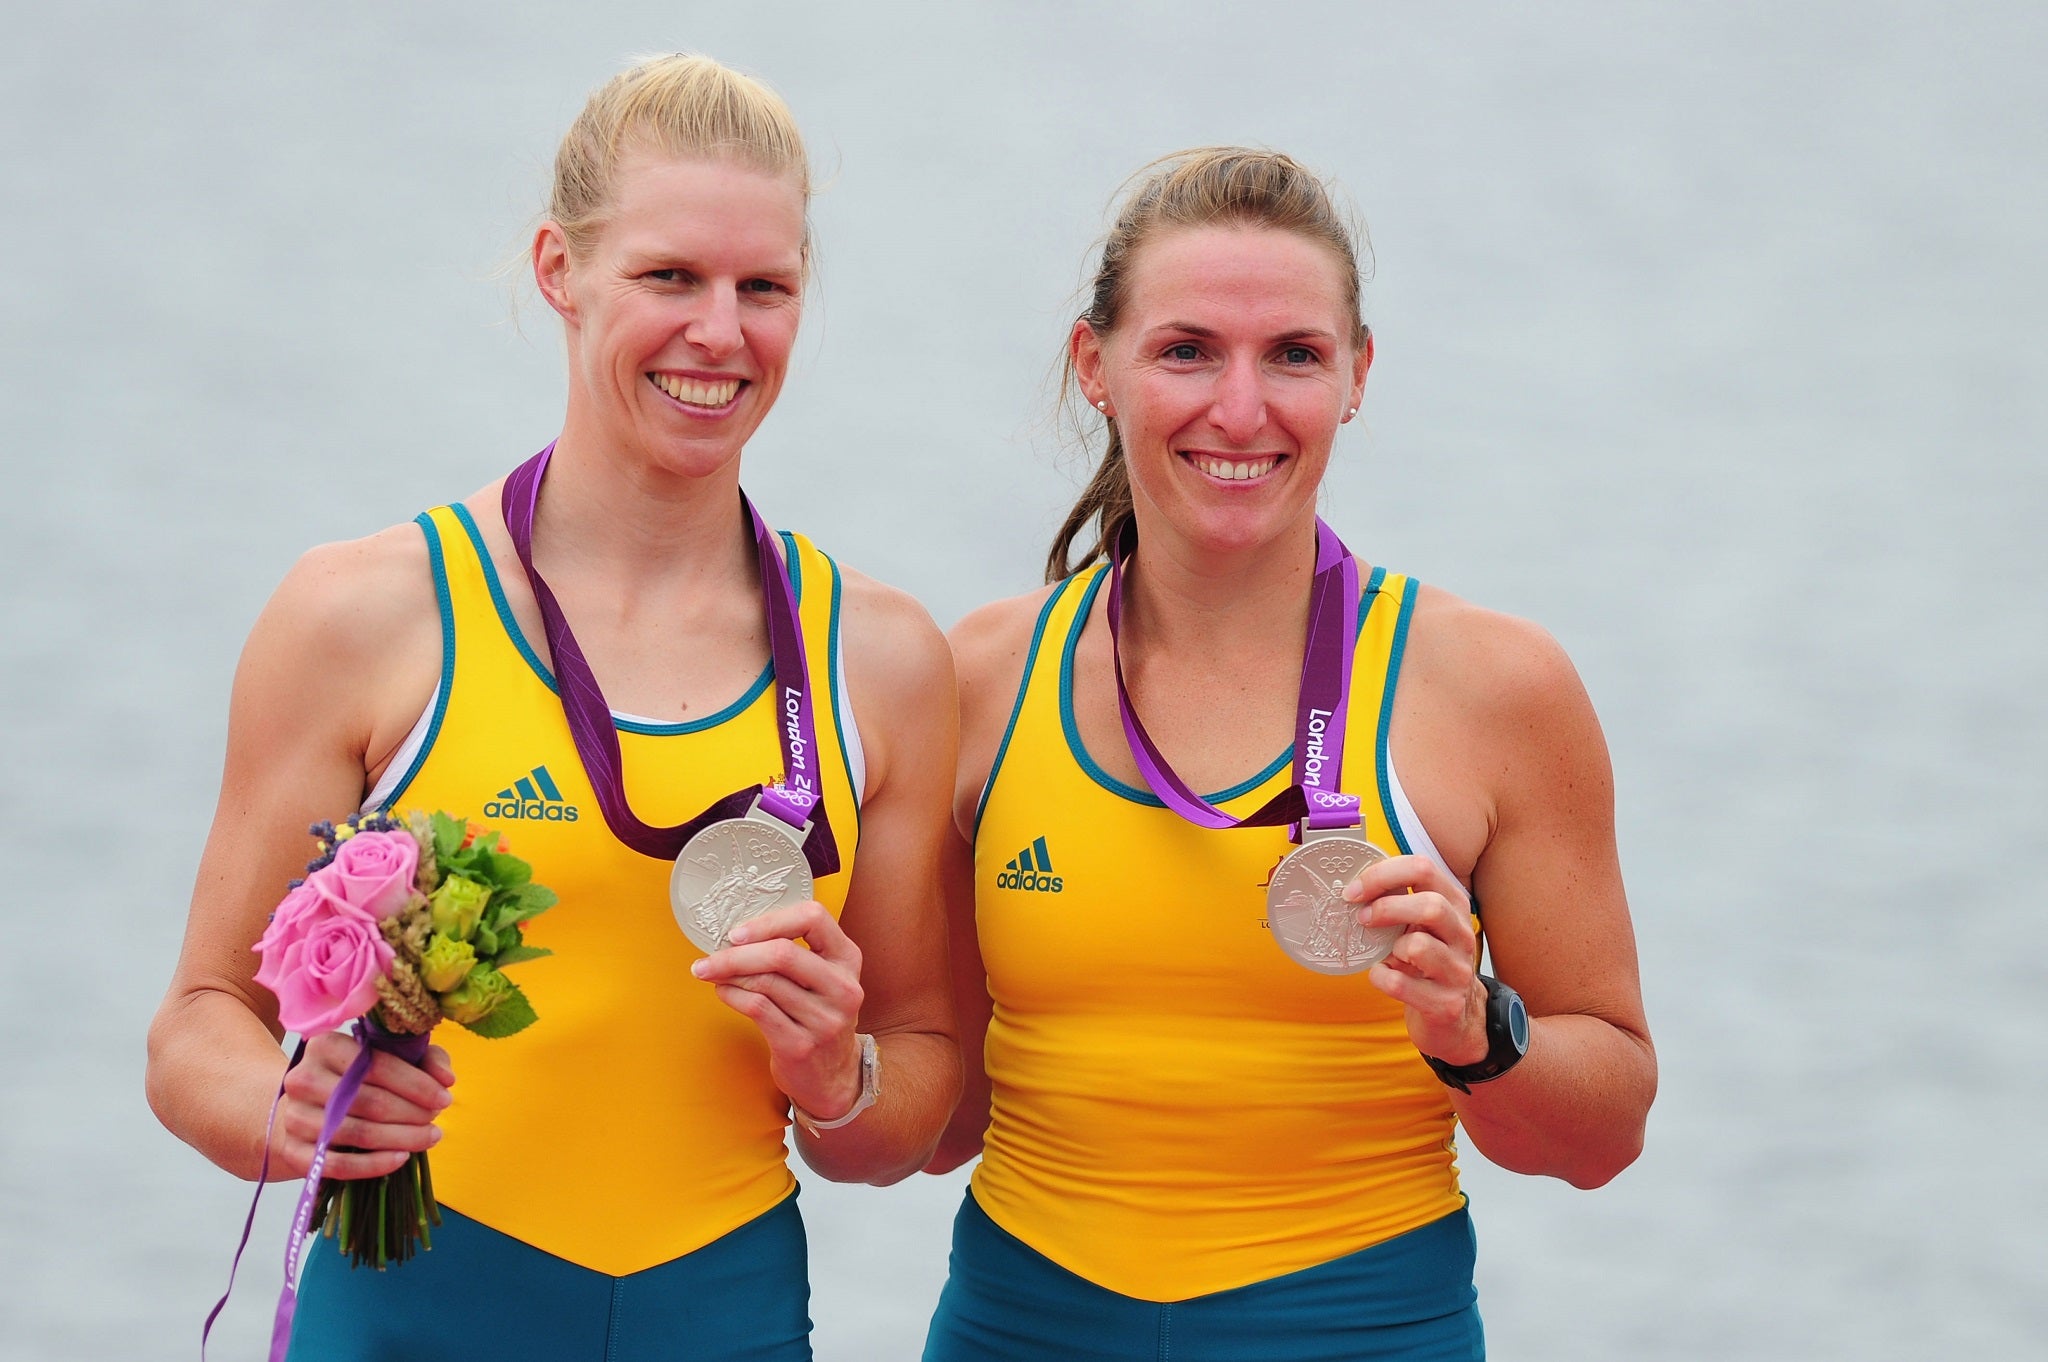 Sarah Tait (left) won Olympic silver alongside Kate Hornsey at London 2012 in the women's pairs